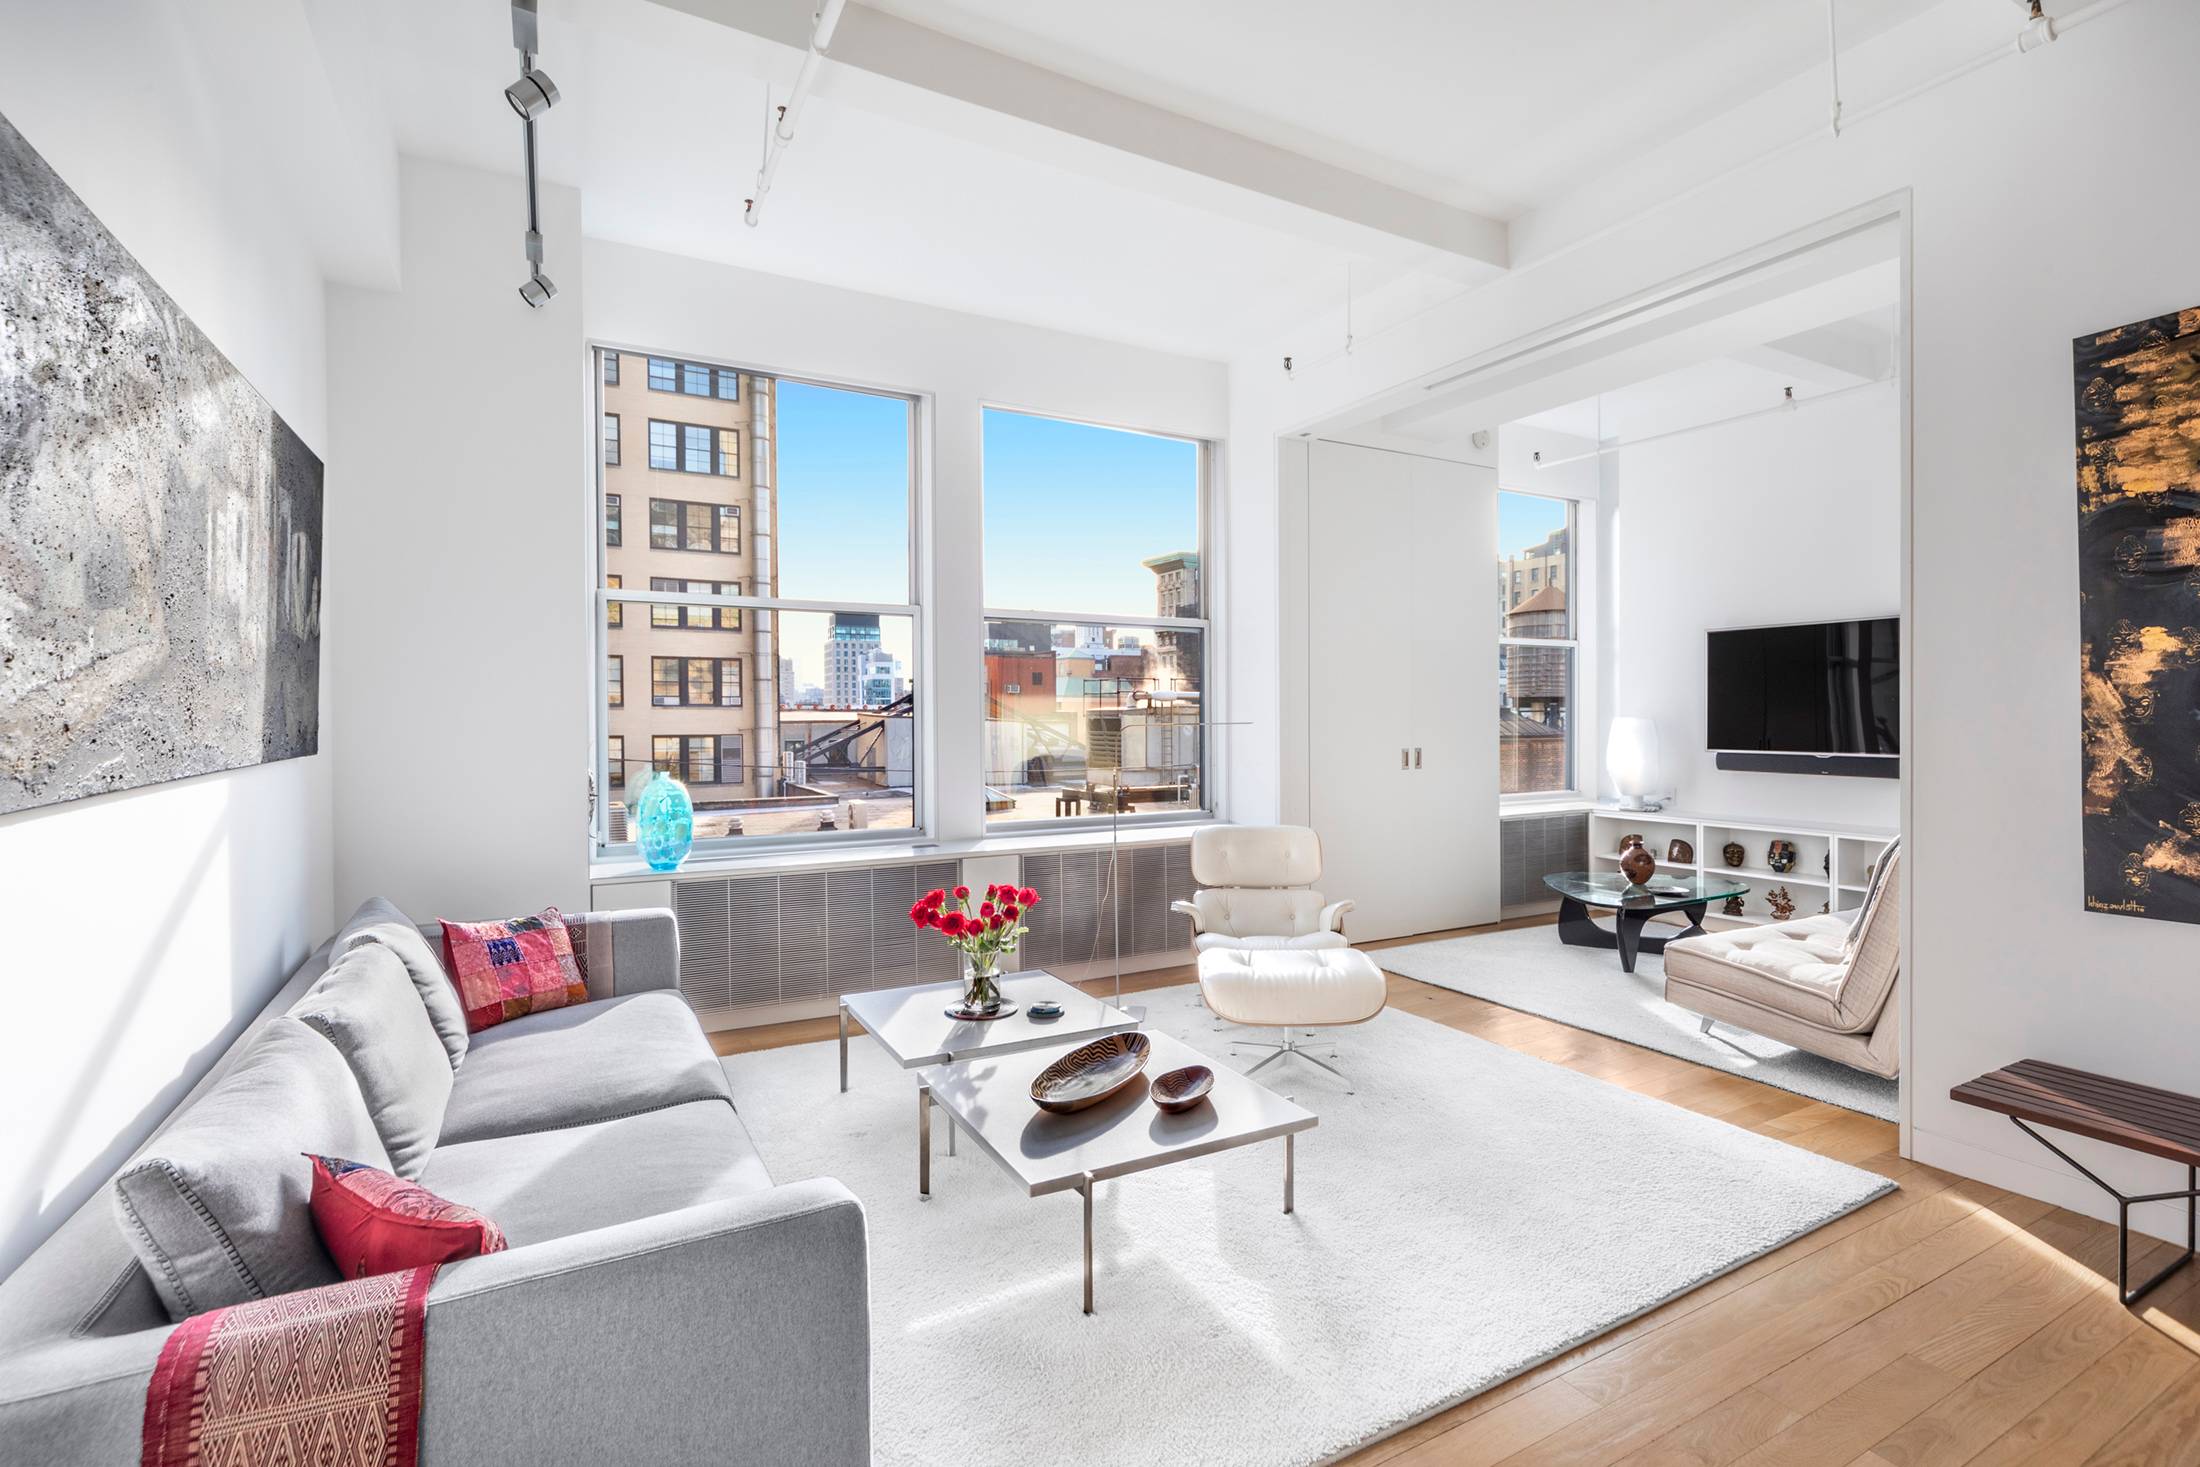 This beautifully renovated, chic, Pre War Loft features stunning custom finishes and the perfect layout all designed by famed architect, Audrey Matlock.